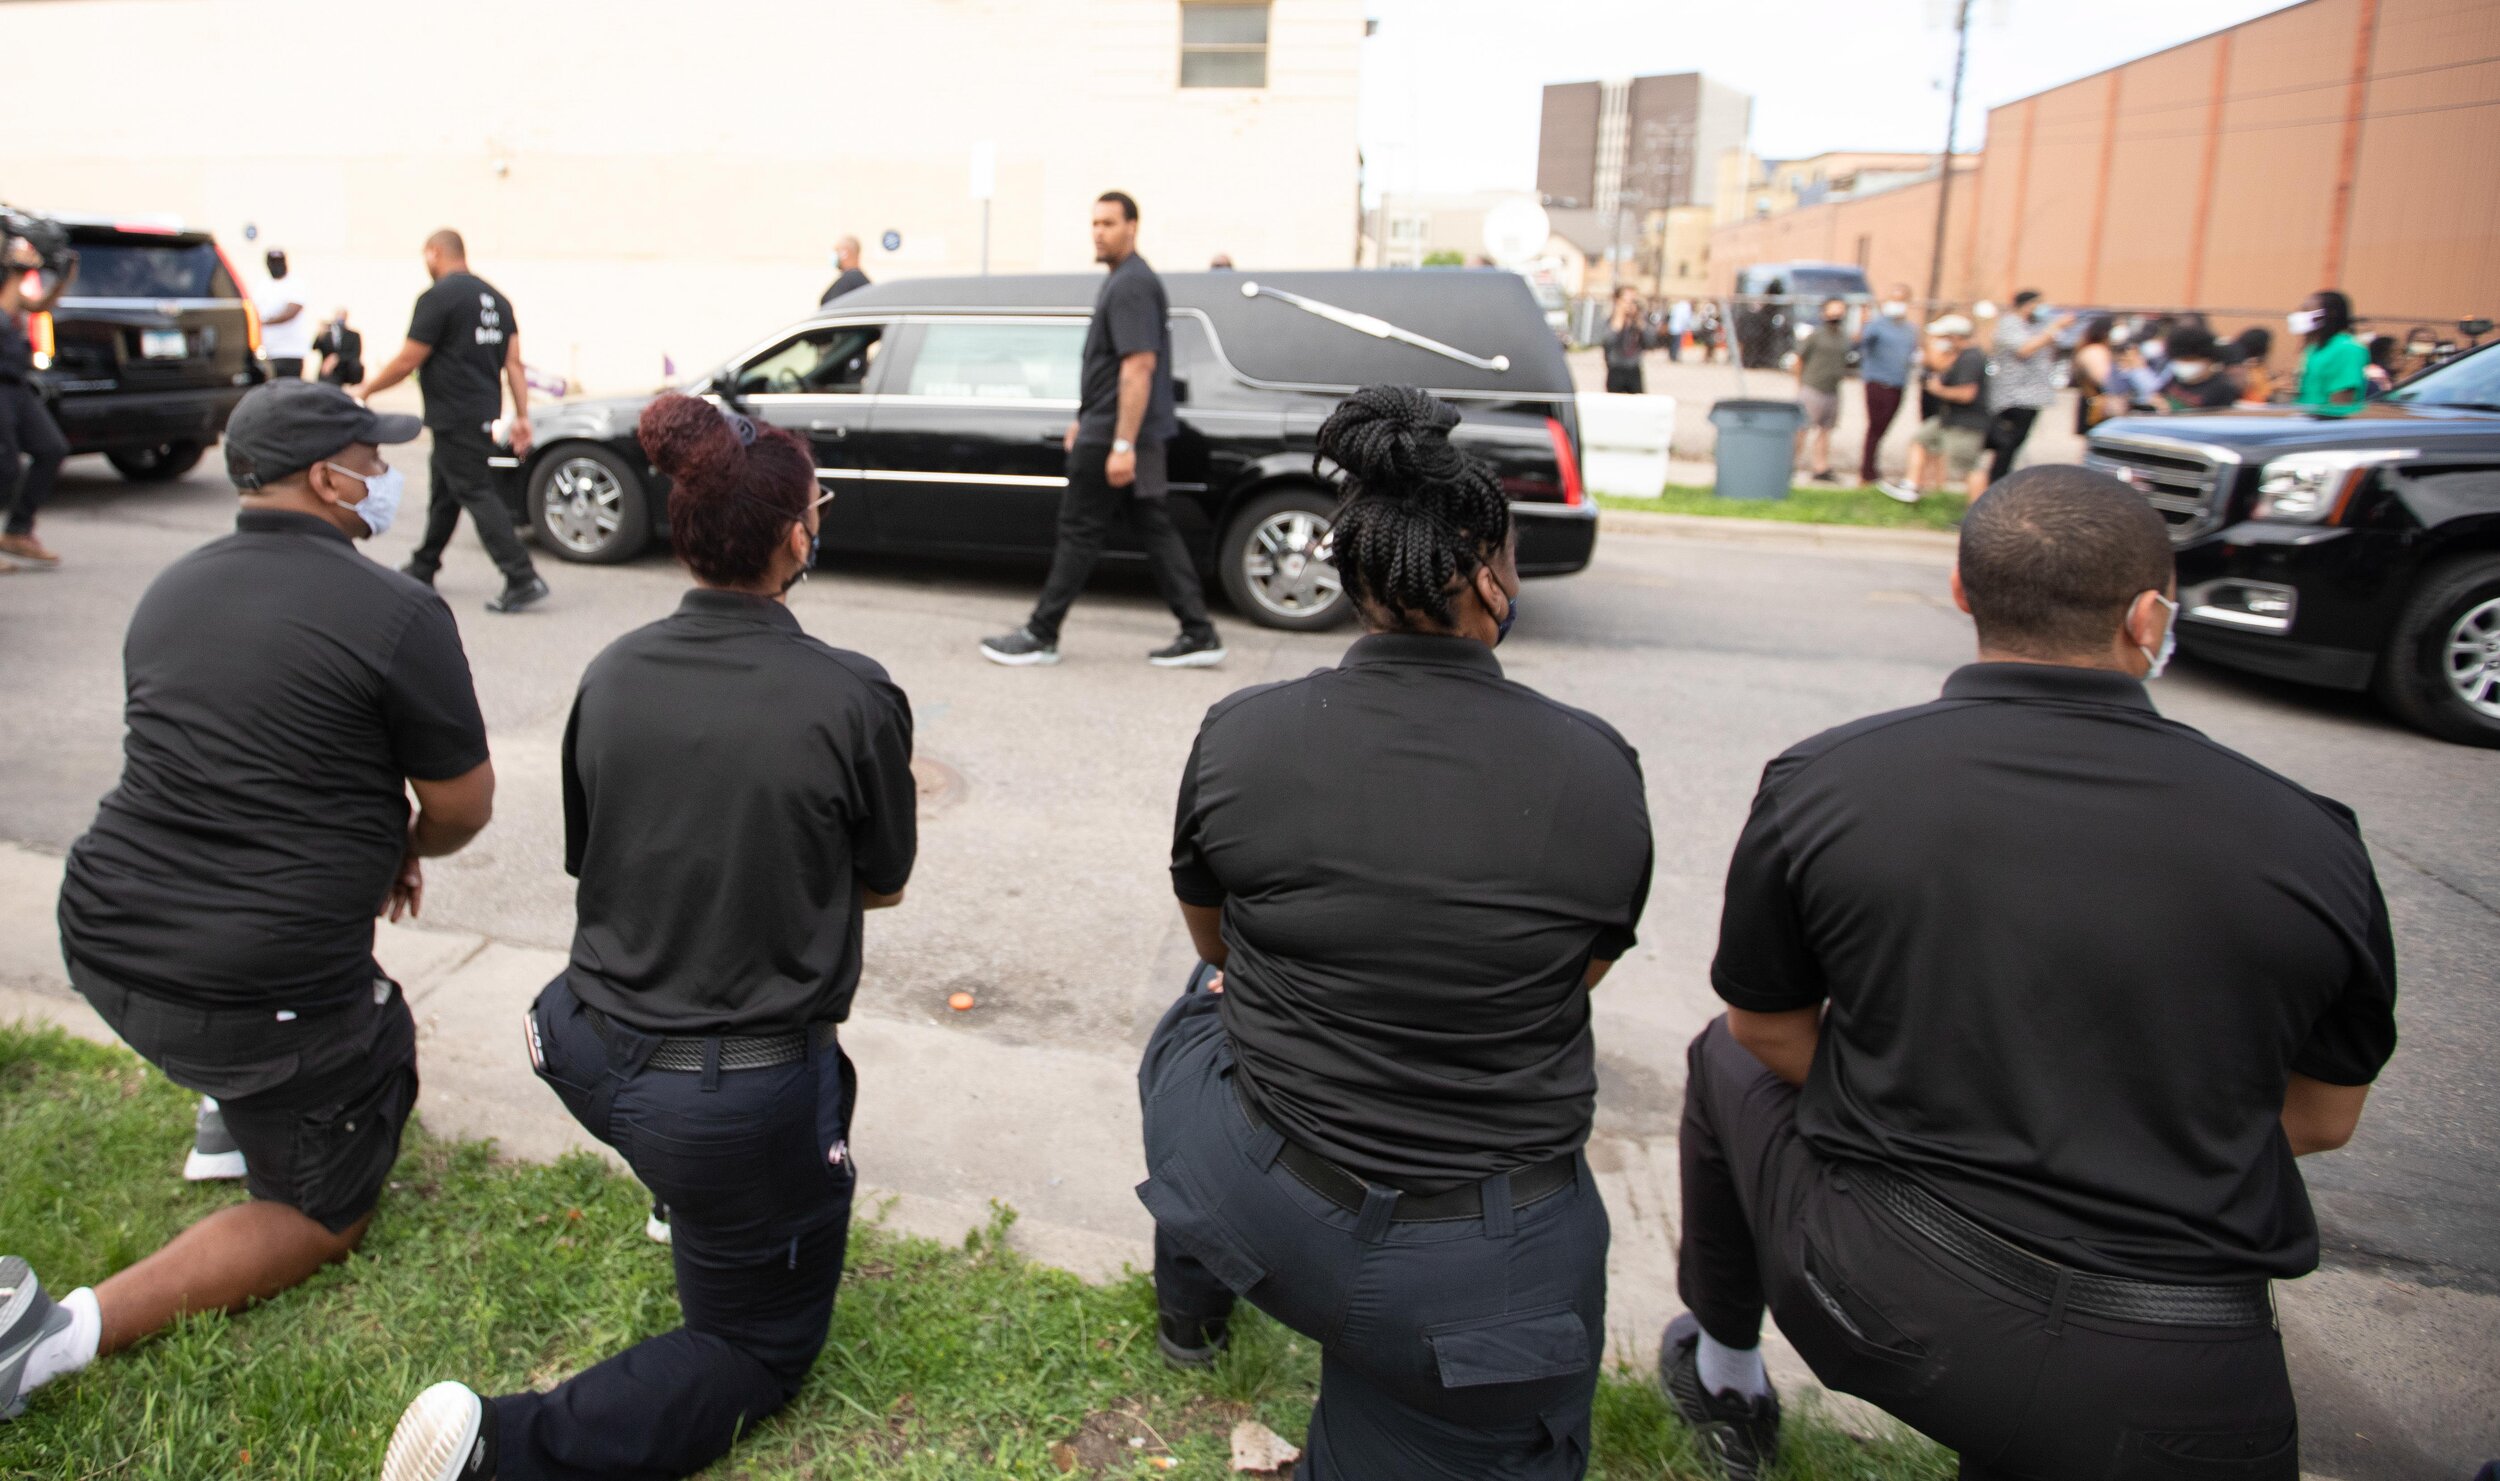  Firefighters take a knee in honor of George Floyd as the hearse containing his casket drives by at a memorial for George at North Central University on Jun 4, 2020. 